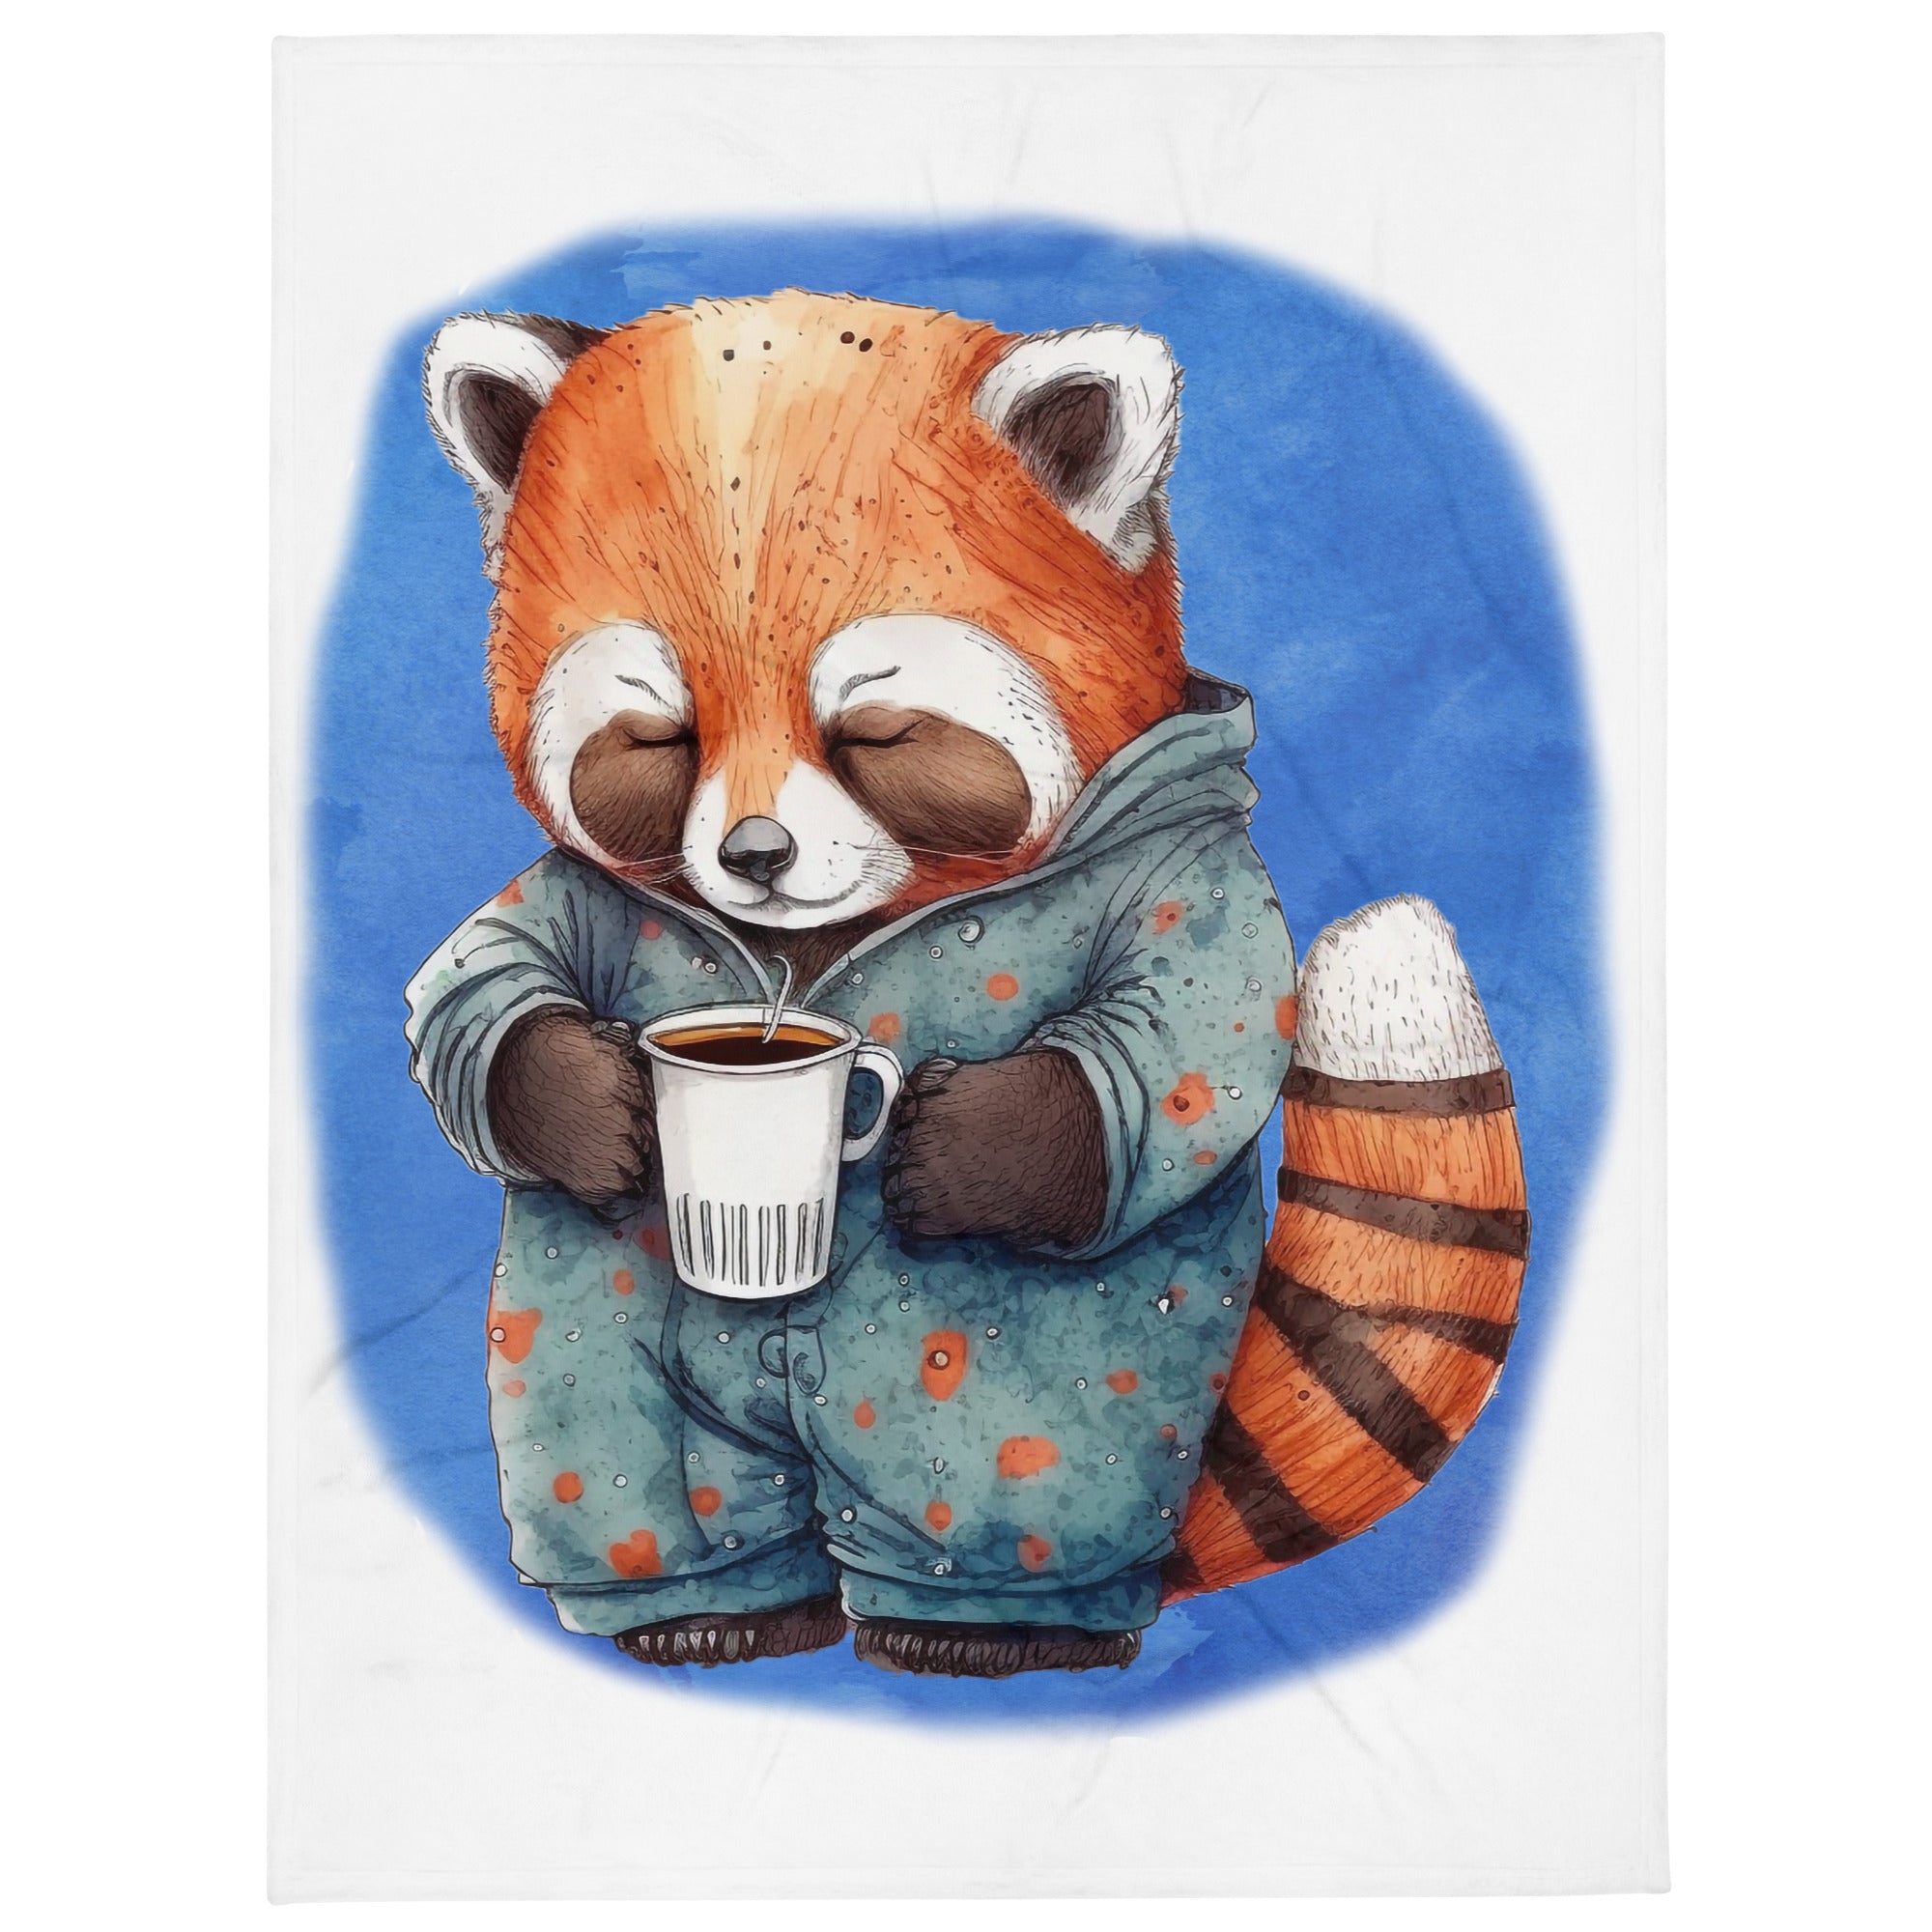 Sleepy Red Panda 100% Polyester Soft Silk Touch Fabric Throw Blanket - Cozy, Durable and Adorable